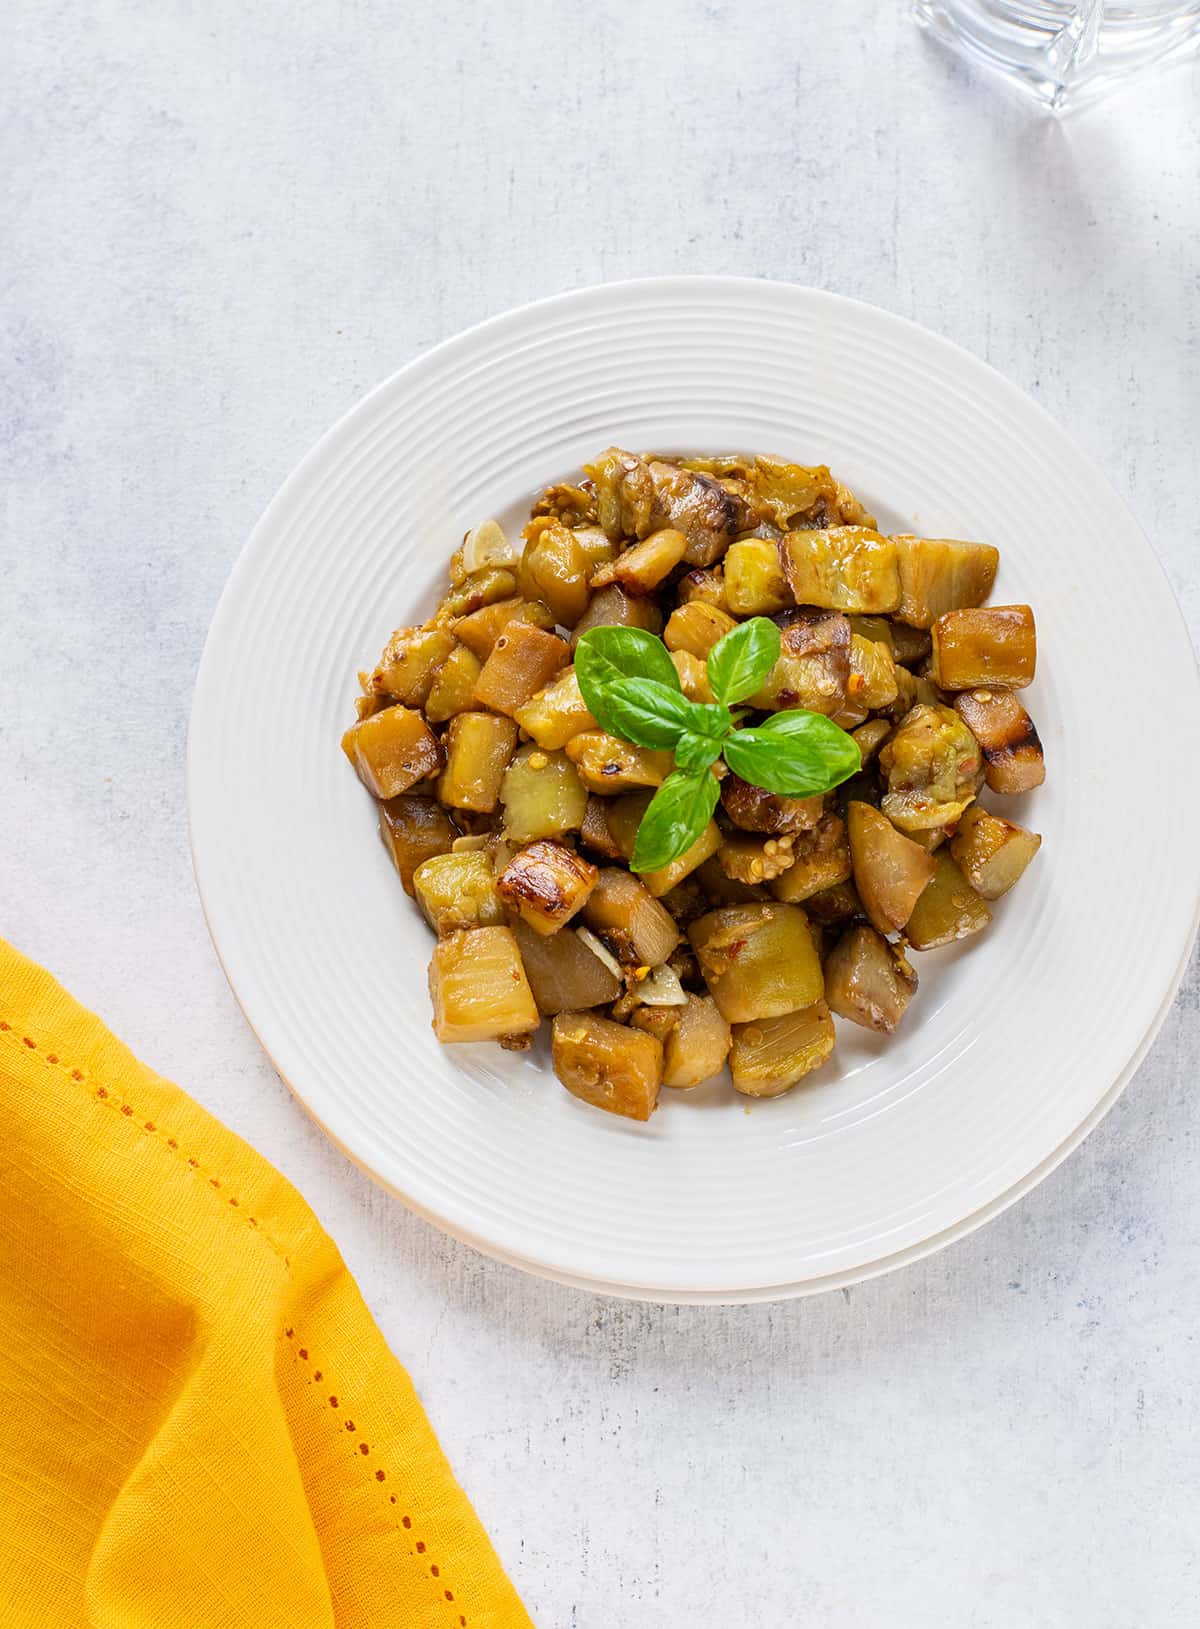 plate of sautéed eggplant cubes garnished with basil